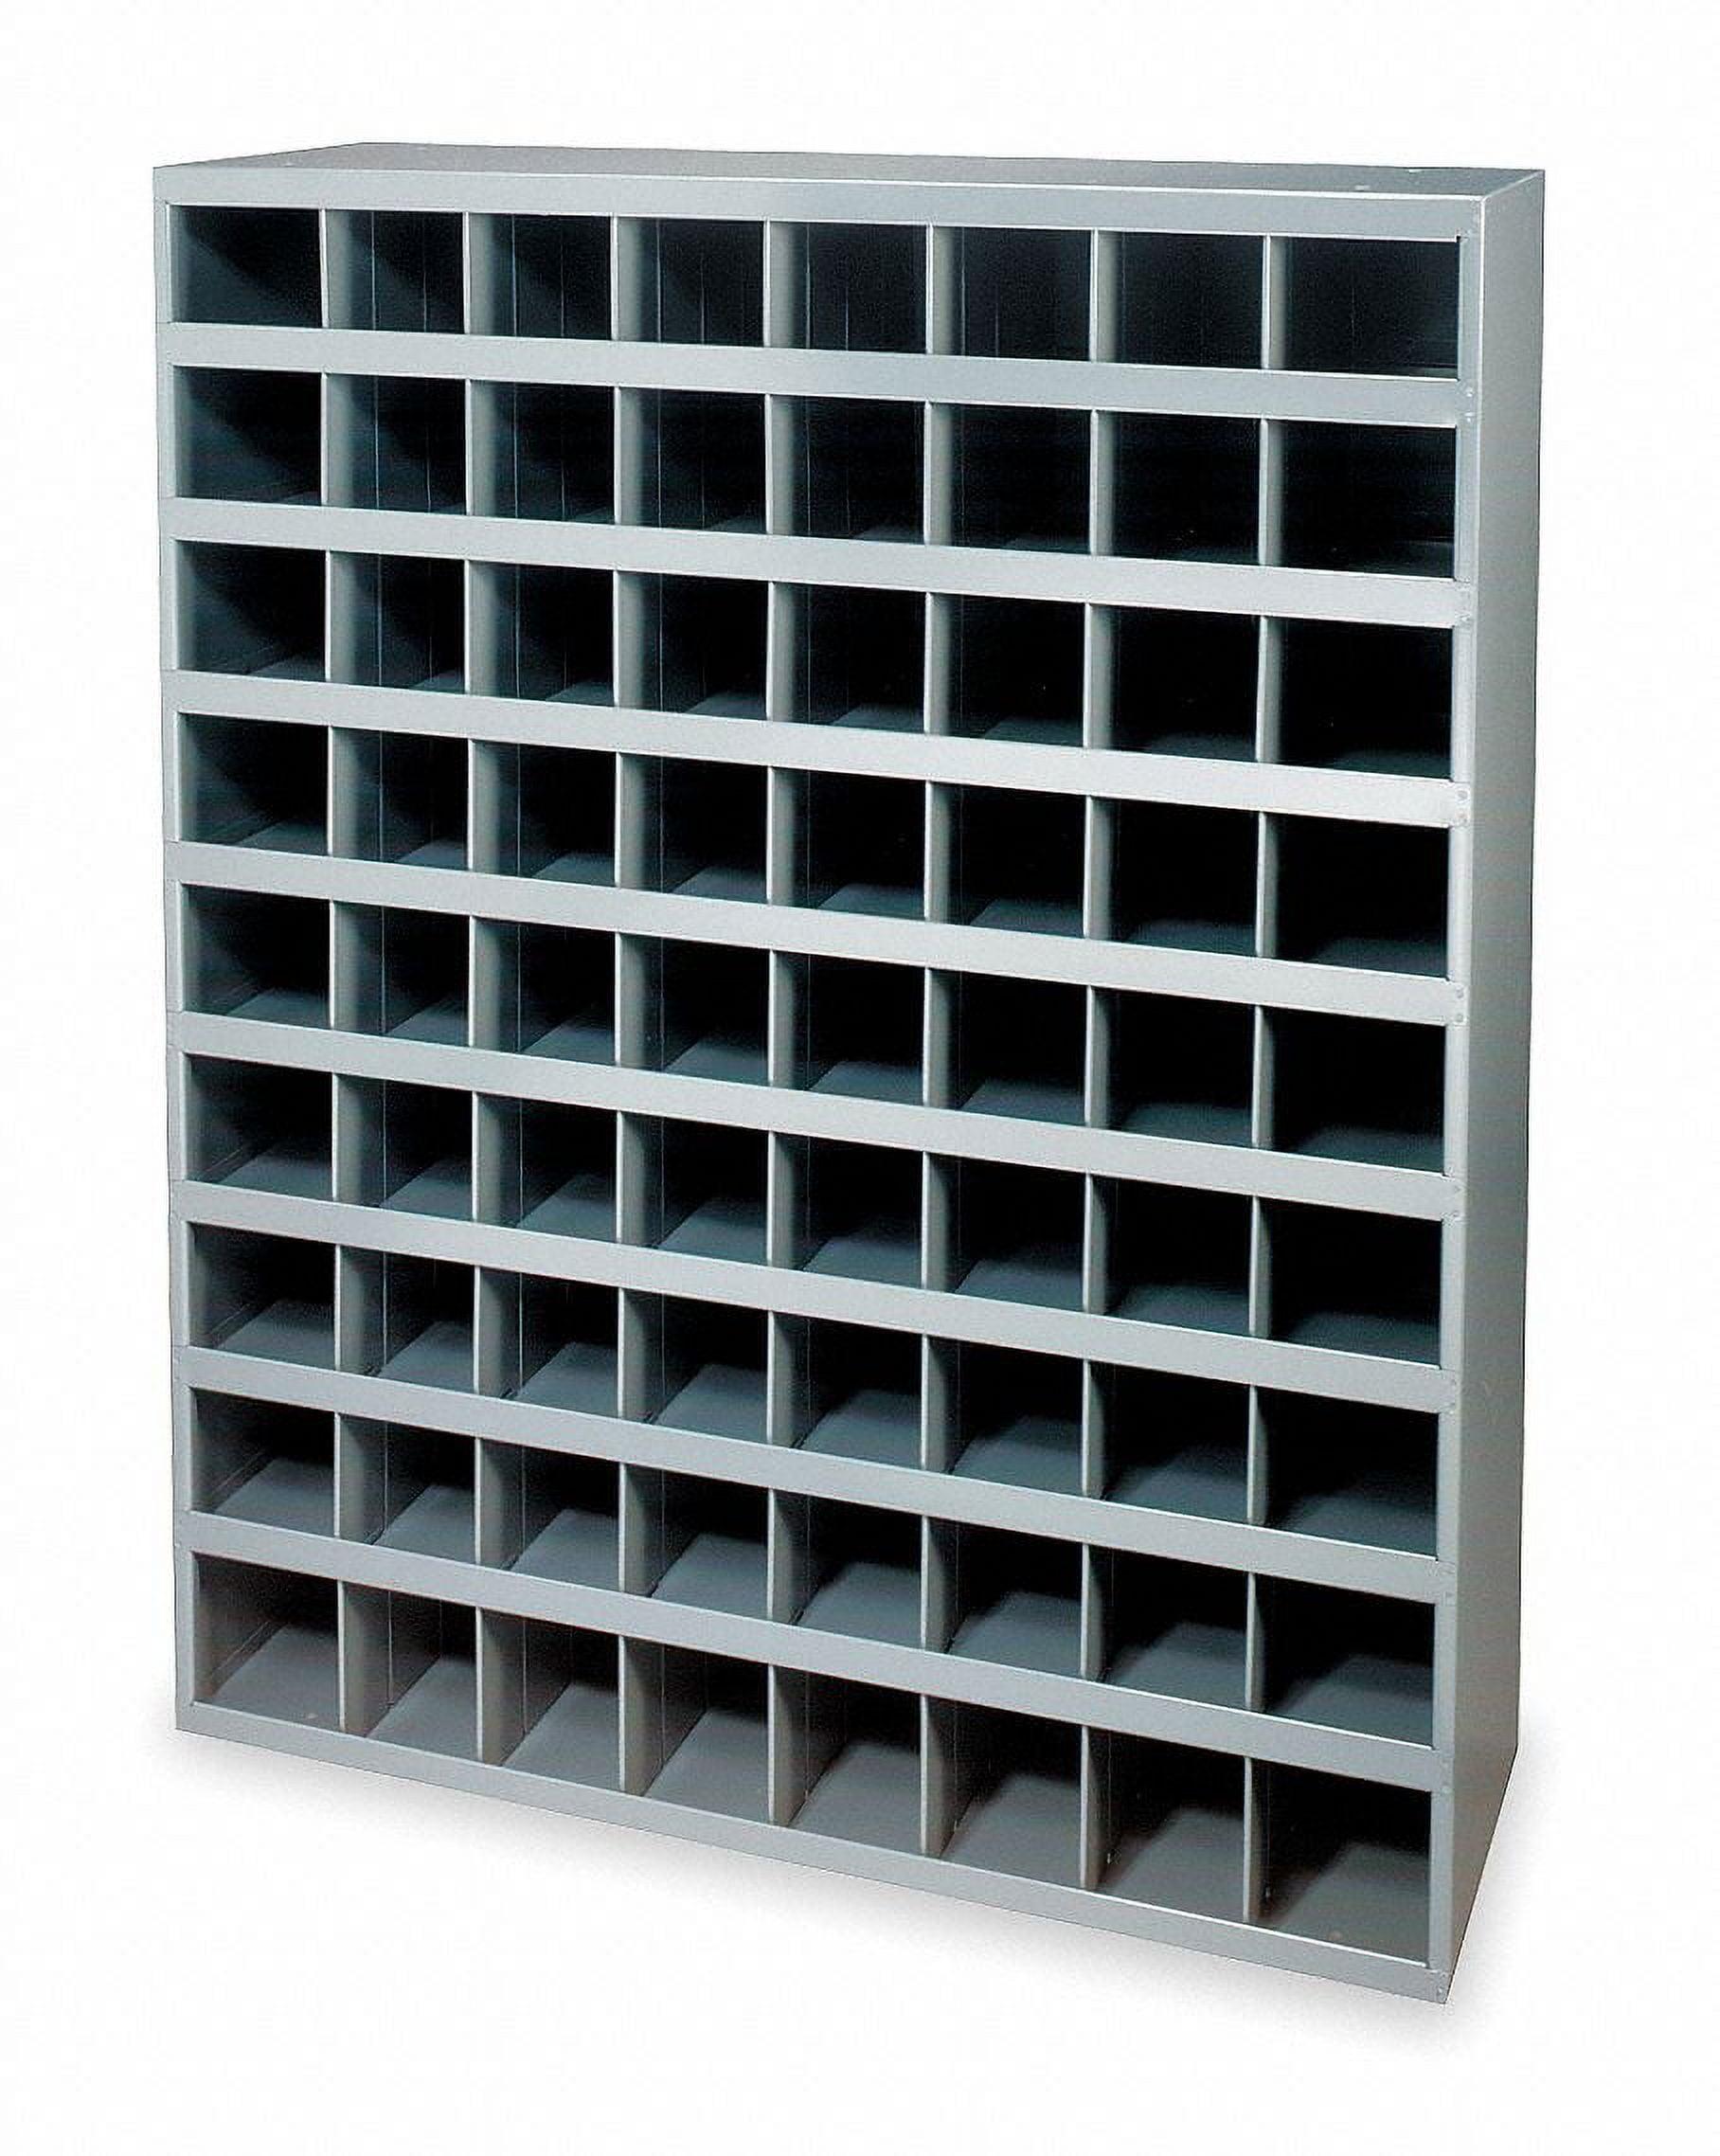 Modern Grey 72-Compartment Steel Storage Unit with Sloped Shelves